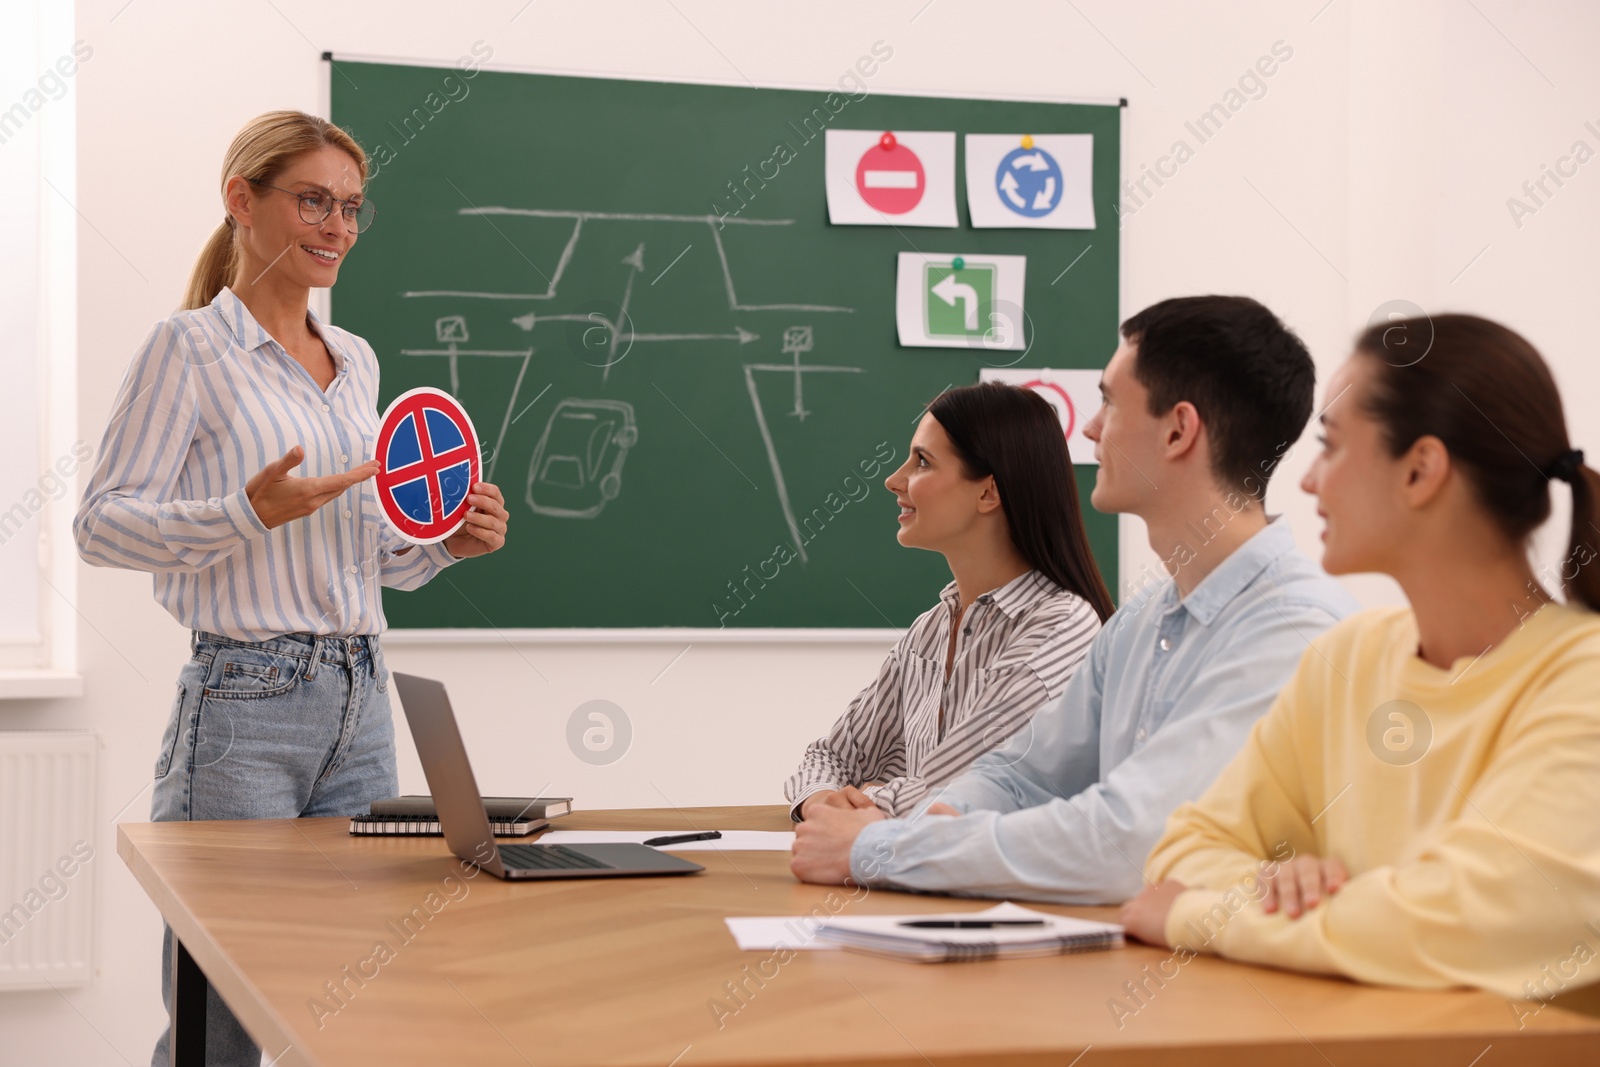 Photo of Teacher showing No Stopping road sign to audience in driving school